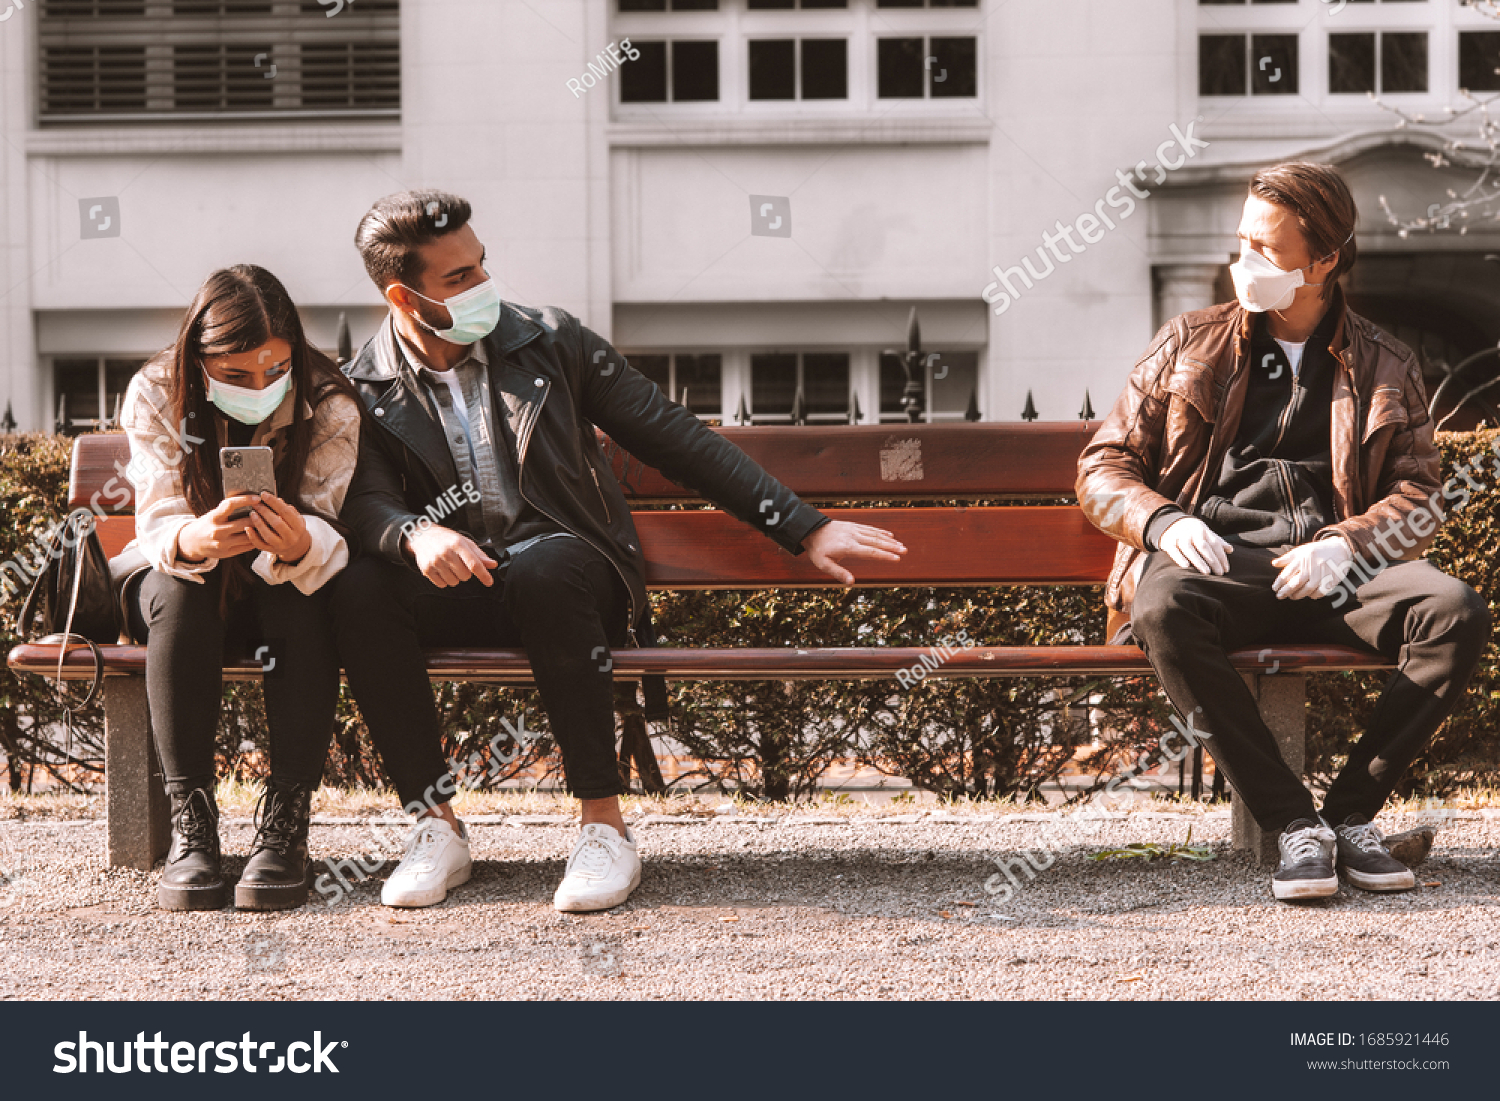 corona covid-19 social distancing concept picture with three people wearing face masks - stay away #1685921446